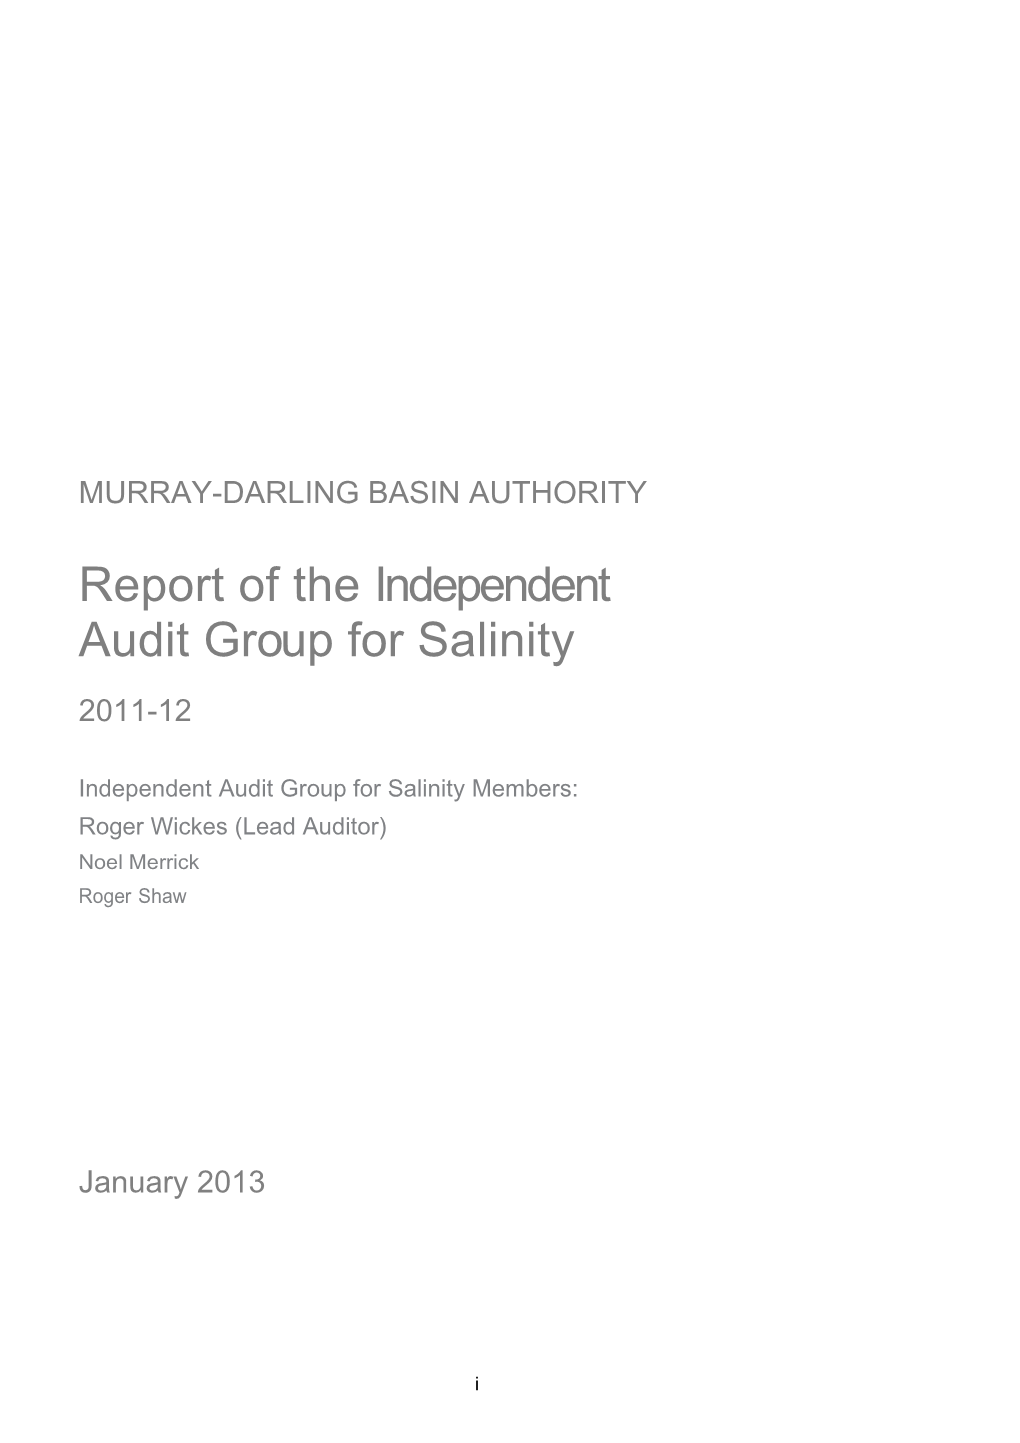 Report of the Independent Audit Group for Salinity 2011-12